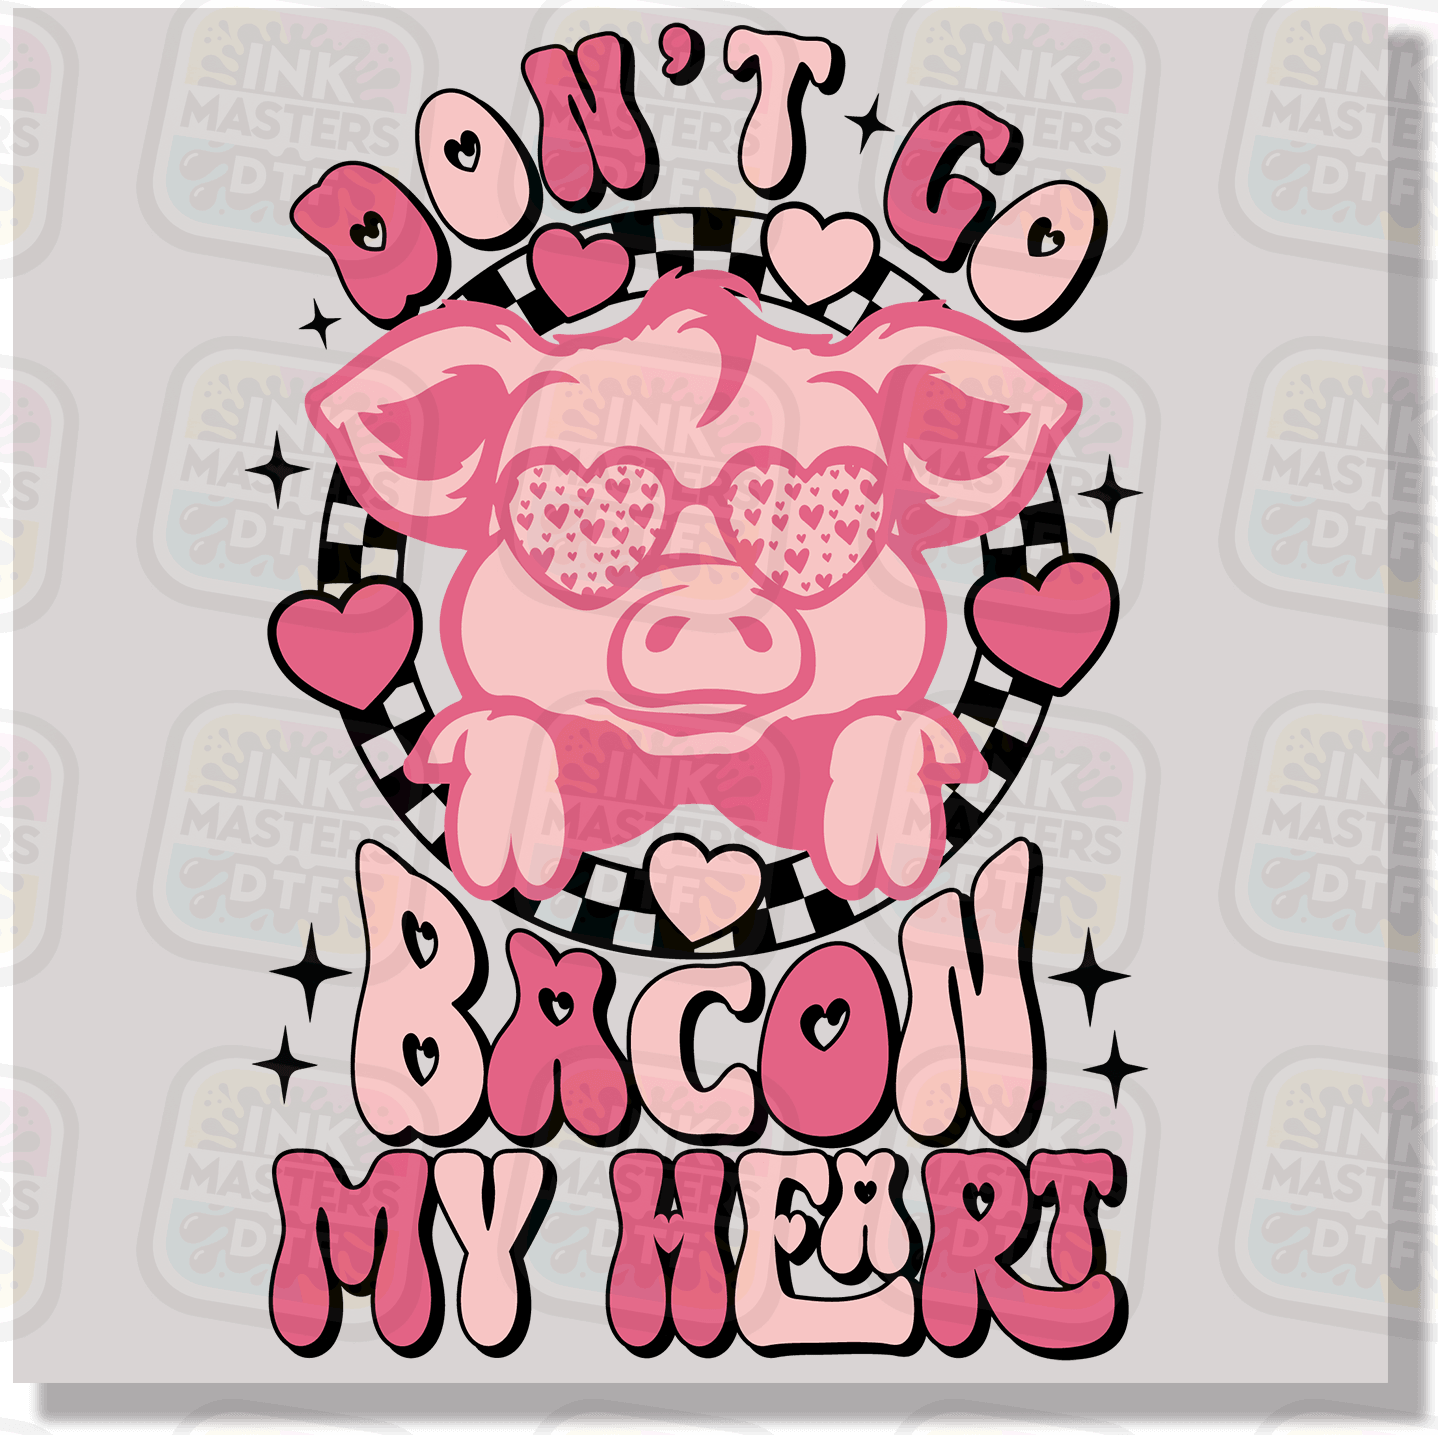 Don't Go Bacon My Heart DTF Transfer - Ink Masters DTF